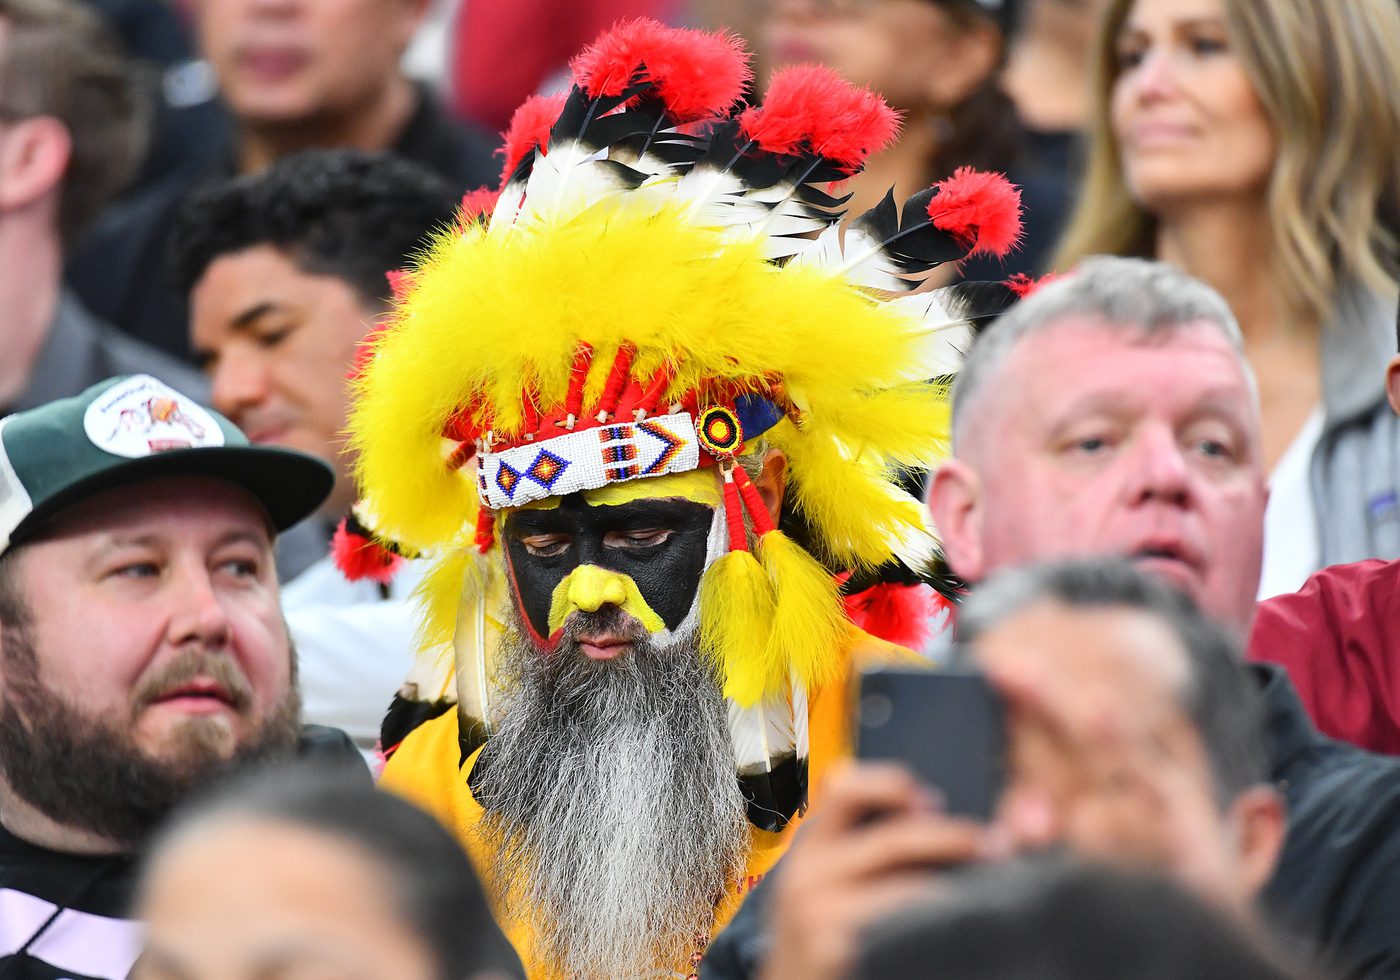 Dec 5, 2021; Paradise, Nevada, USA; A fan dressed in a Native American costume looks on from the stands during a game between the Las Vegas Raiders and the Washington Football Team at Allegiant Stadium. Mandatory Credit: Stephen R. Sylvanie-USA TODAY Sports